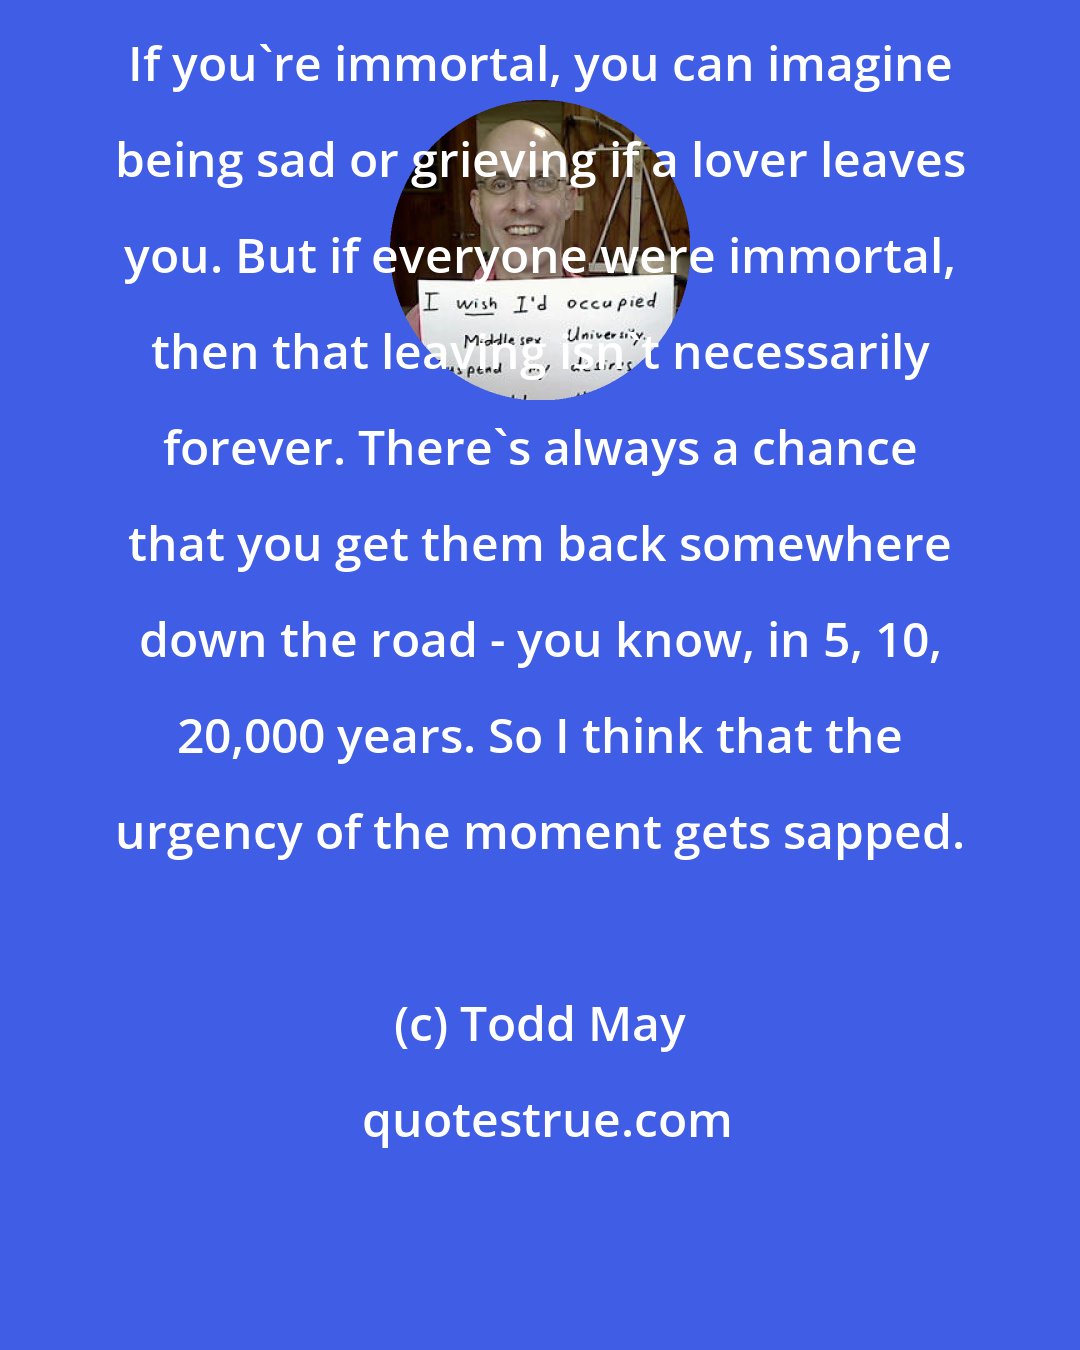 Todd May: If you're immortal, you can imagine being sad or grieving if a lover leaves you. But if everyone were immortal, then that leaving isn't necessarily forever. There's always a chance that you get them back somewhere down the road - you know, in 5, 10, 20,000 years. So I think that the urgency of the moment gets sapped.